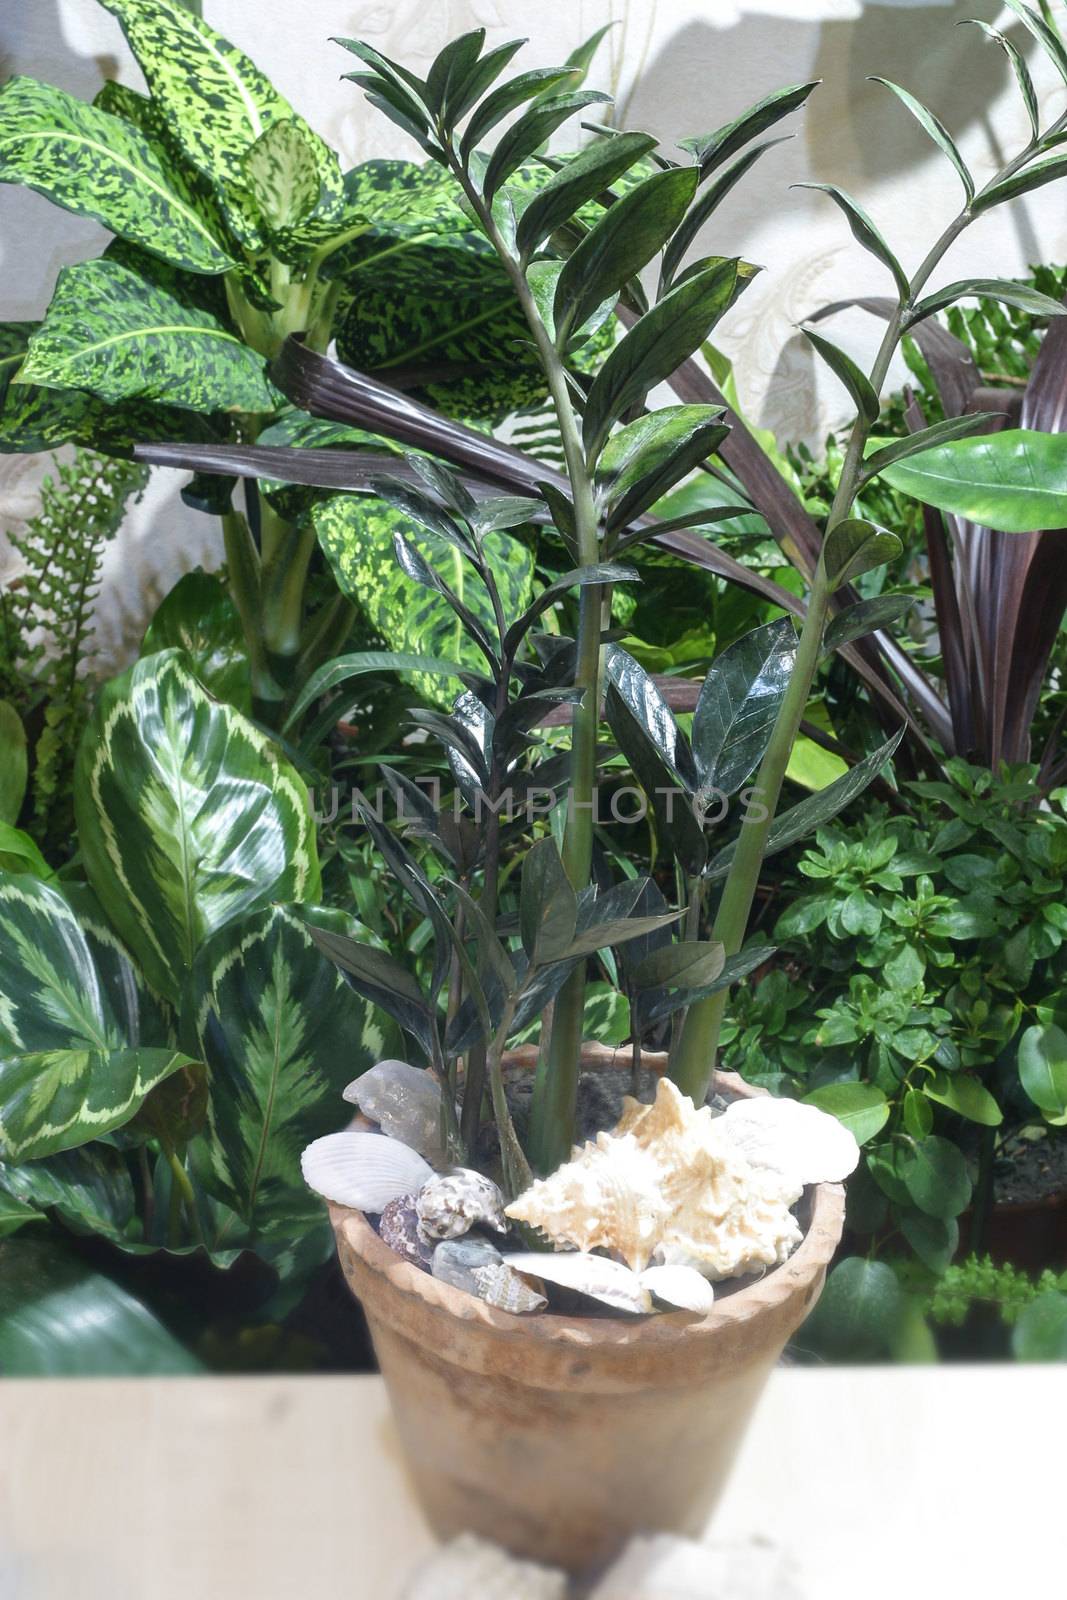 Tropical plant zamioculcas and a lot of tropical plants in home jungle. Dollar tree.